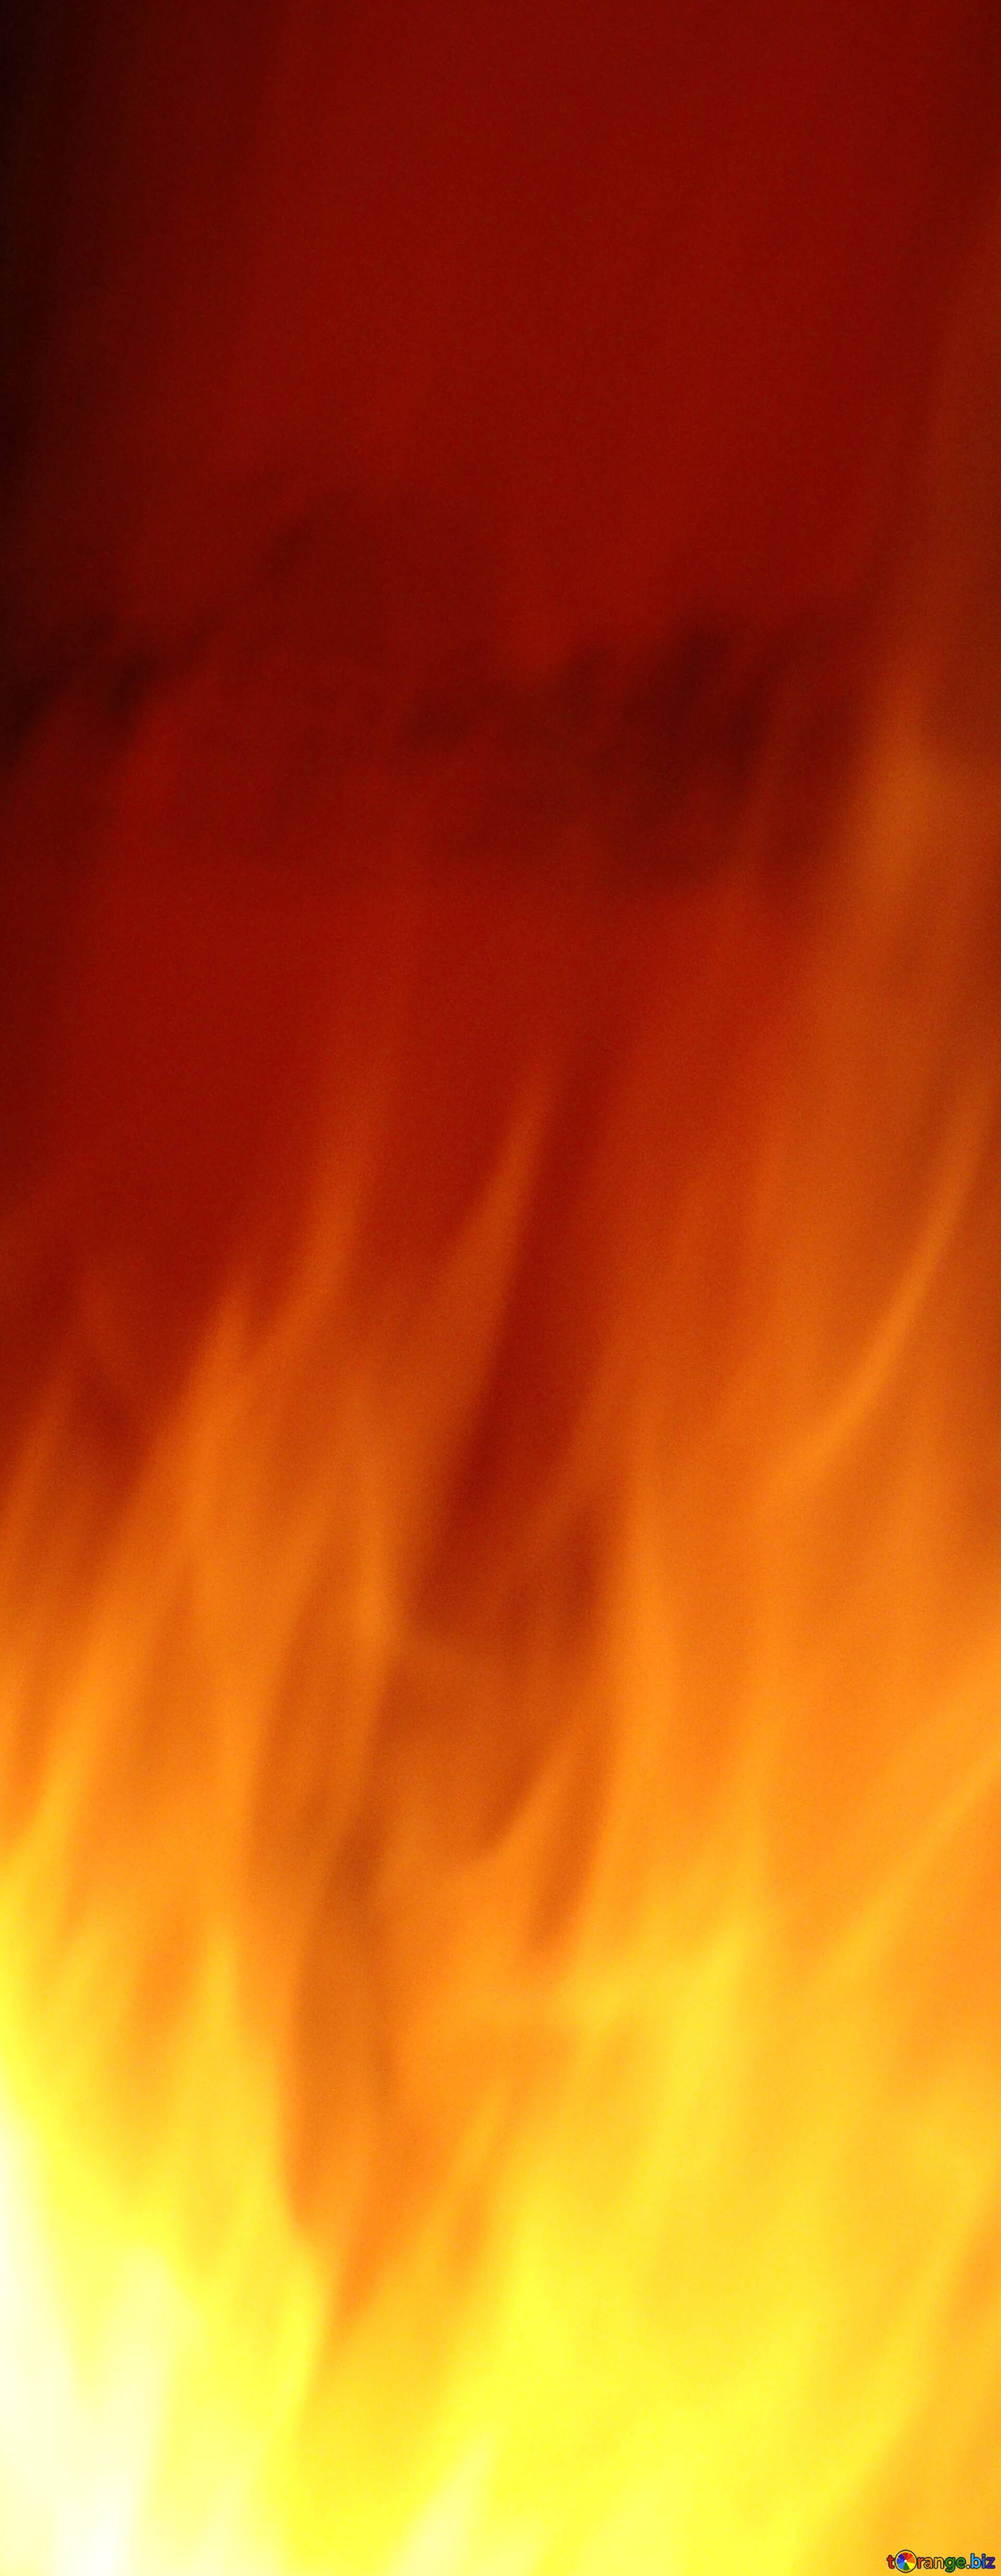 Download free picture banner flame background on CC-BY License ~ Free Image  Stock  ~ fx №73520